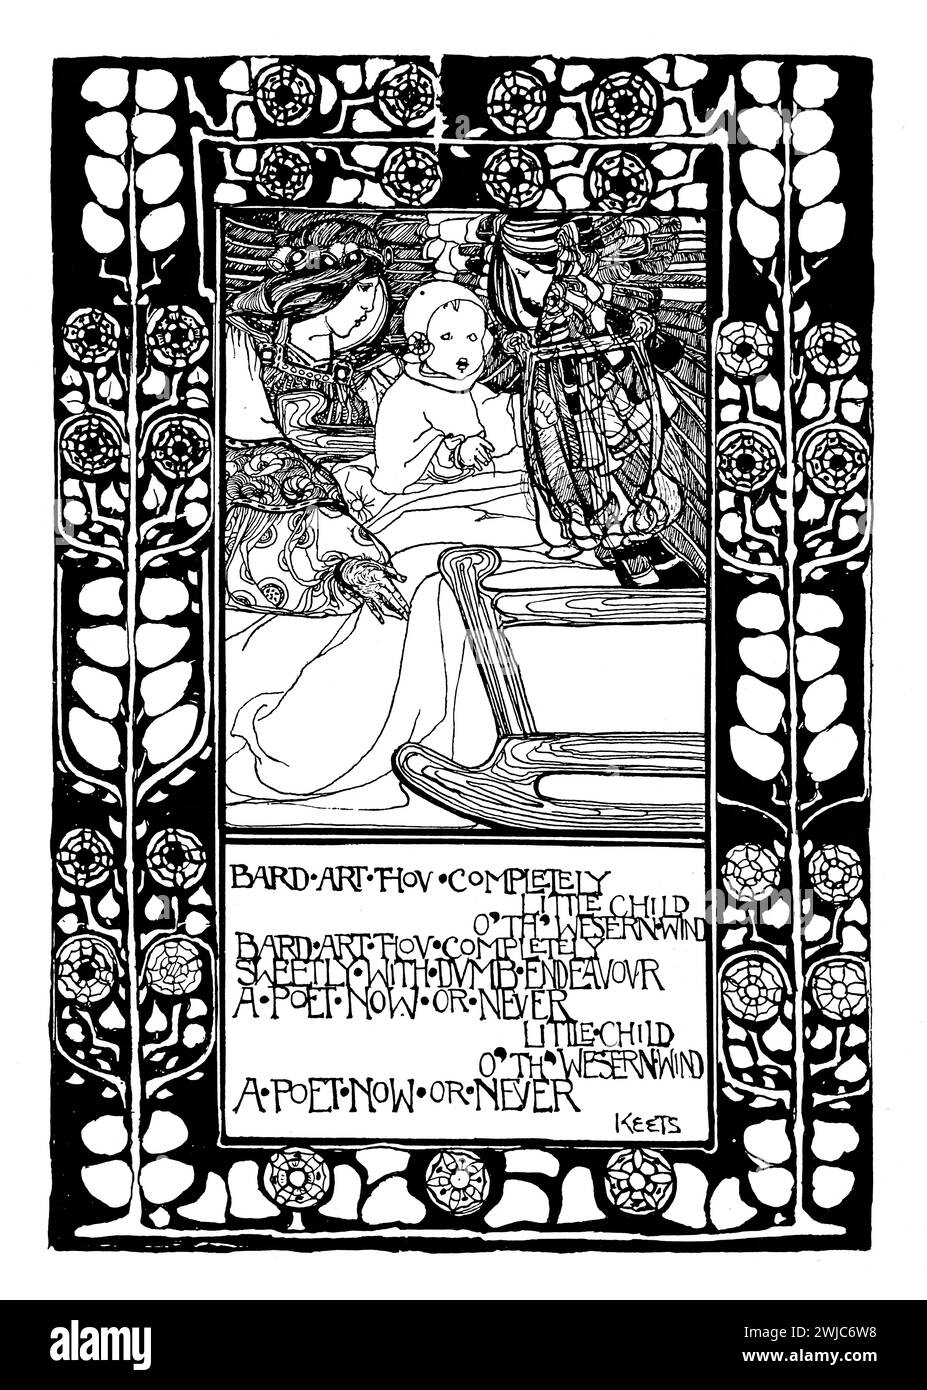 1901 Tis the witching time of night Poem, di John Keats line Illustration by Chance Foto Stock